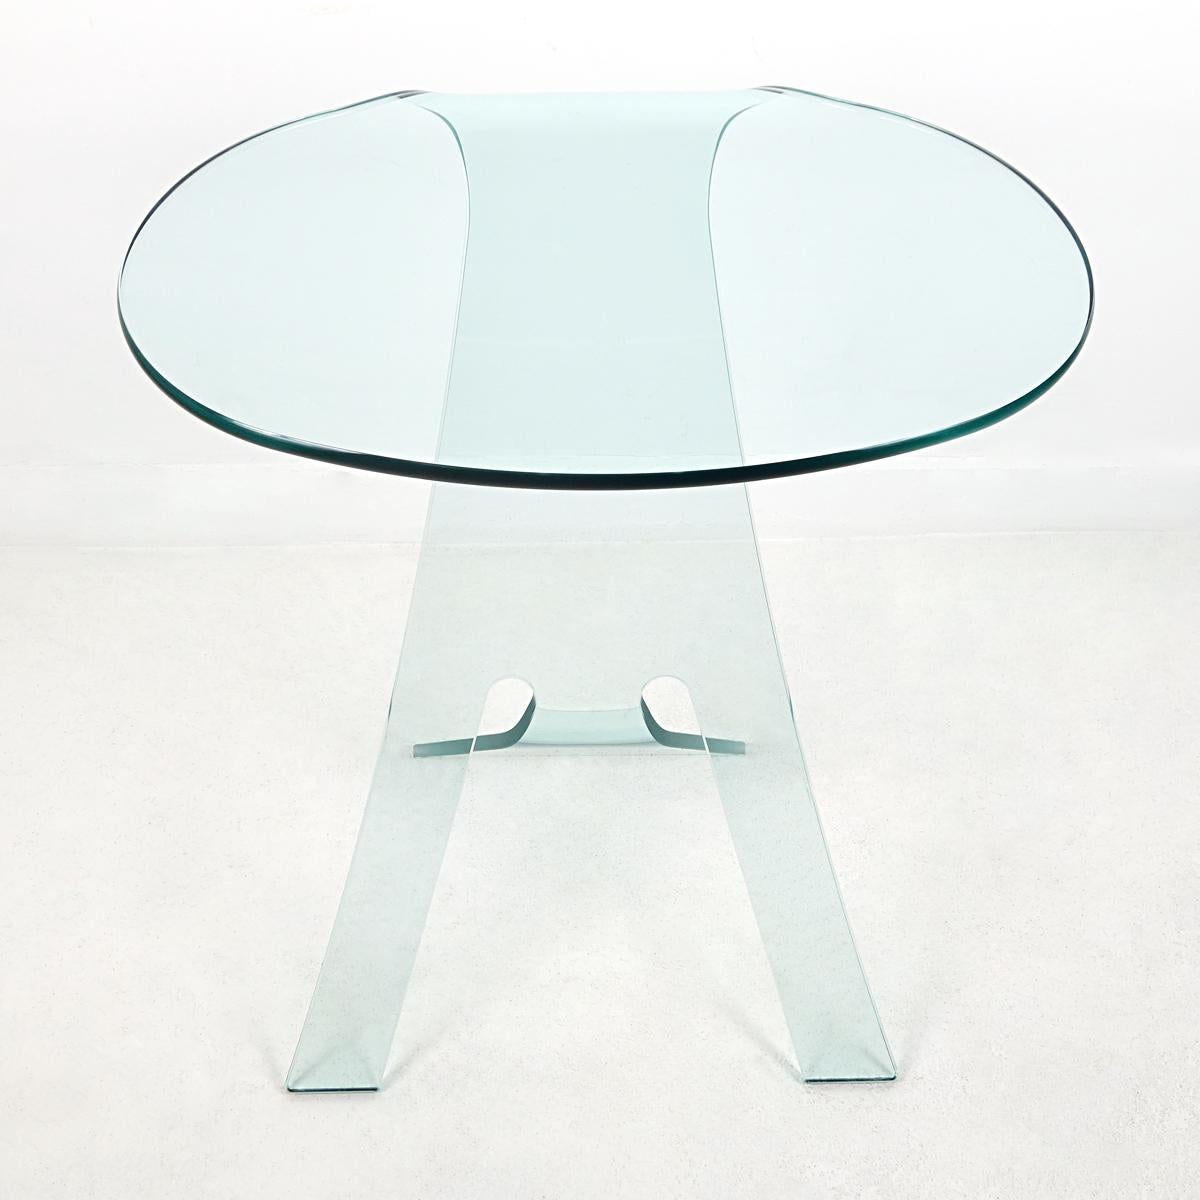 Wonderfully shaped occasional or cocktail table designed by the founder of Italian glass design specialist Fiam Italia: Vittorio Livi. The table is almost too pretty to put anything on it. The glass of the Grillo flows organically but there is also